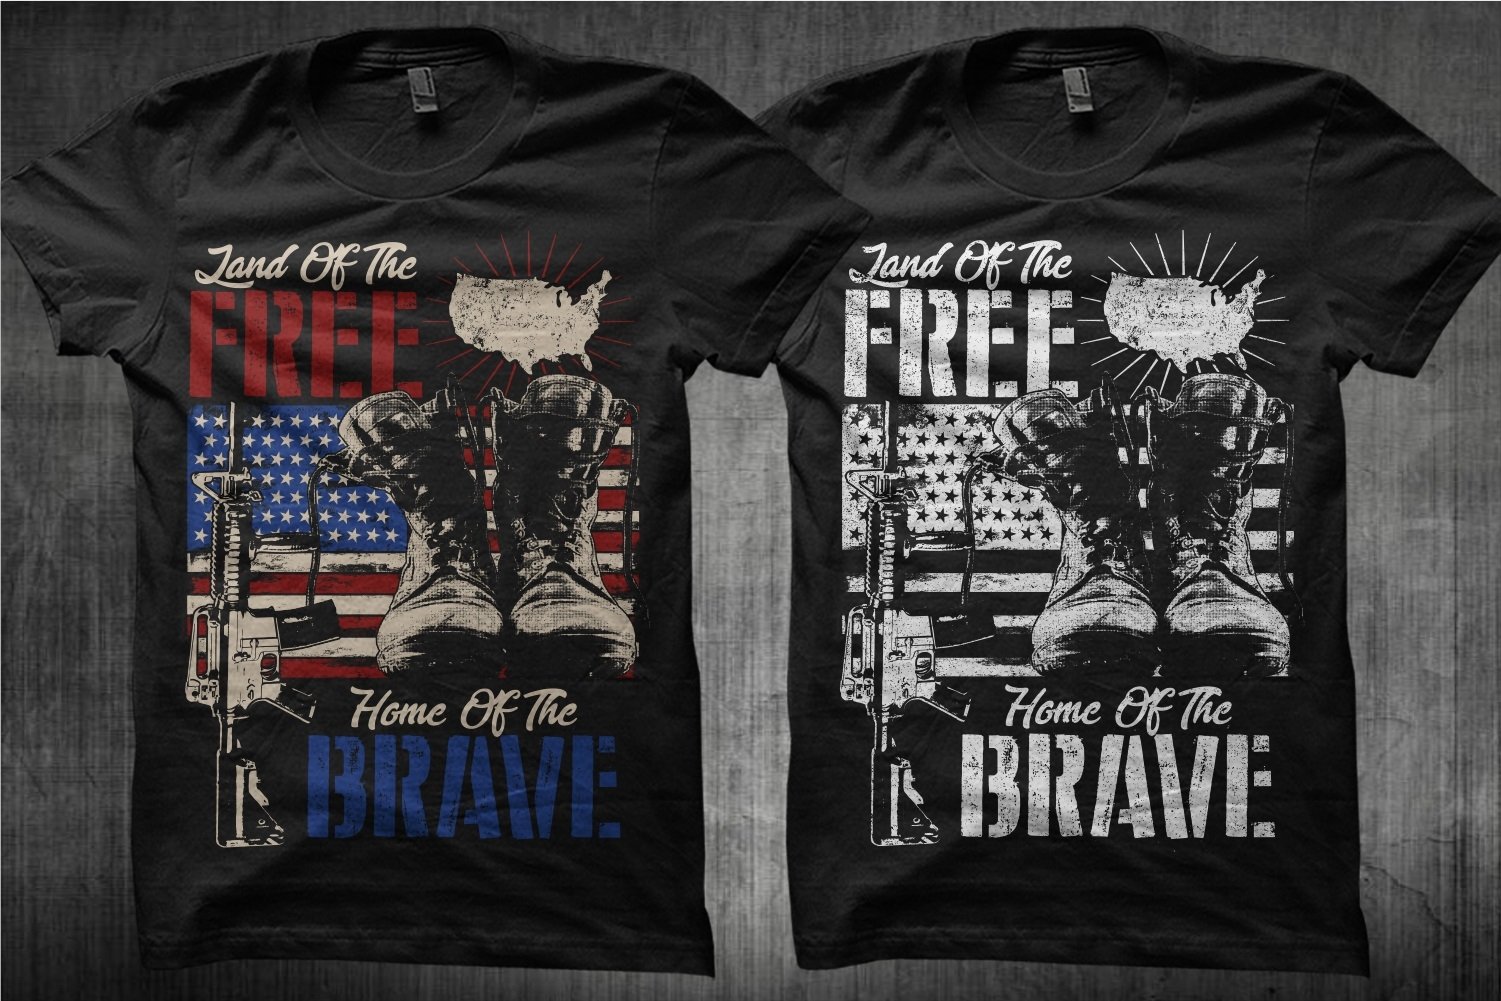 Two t-shirts with military prints.